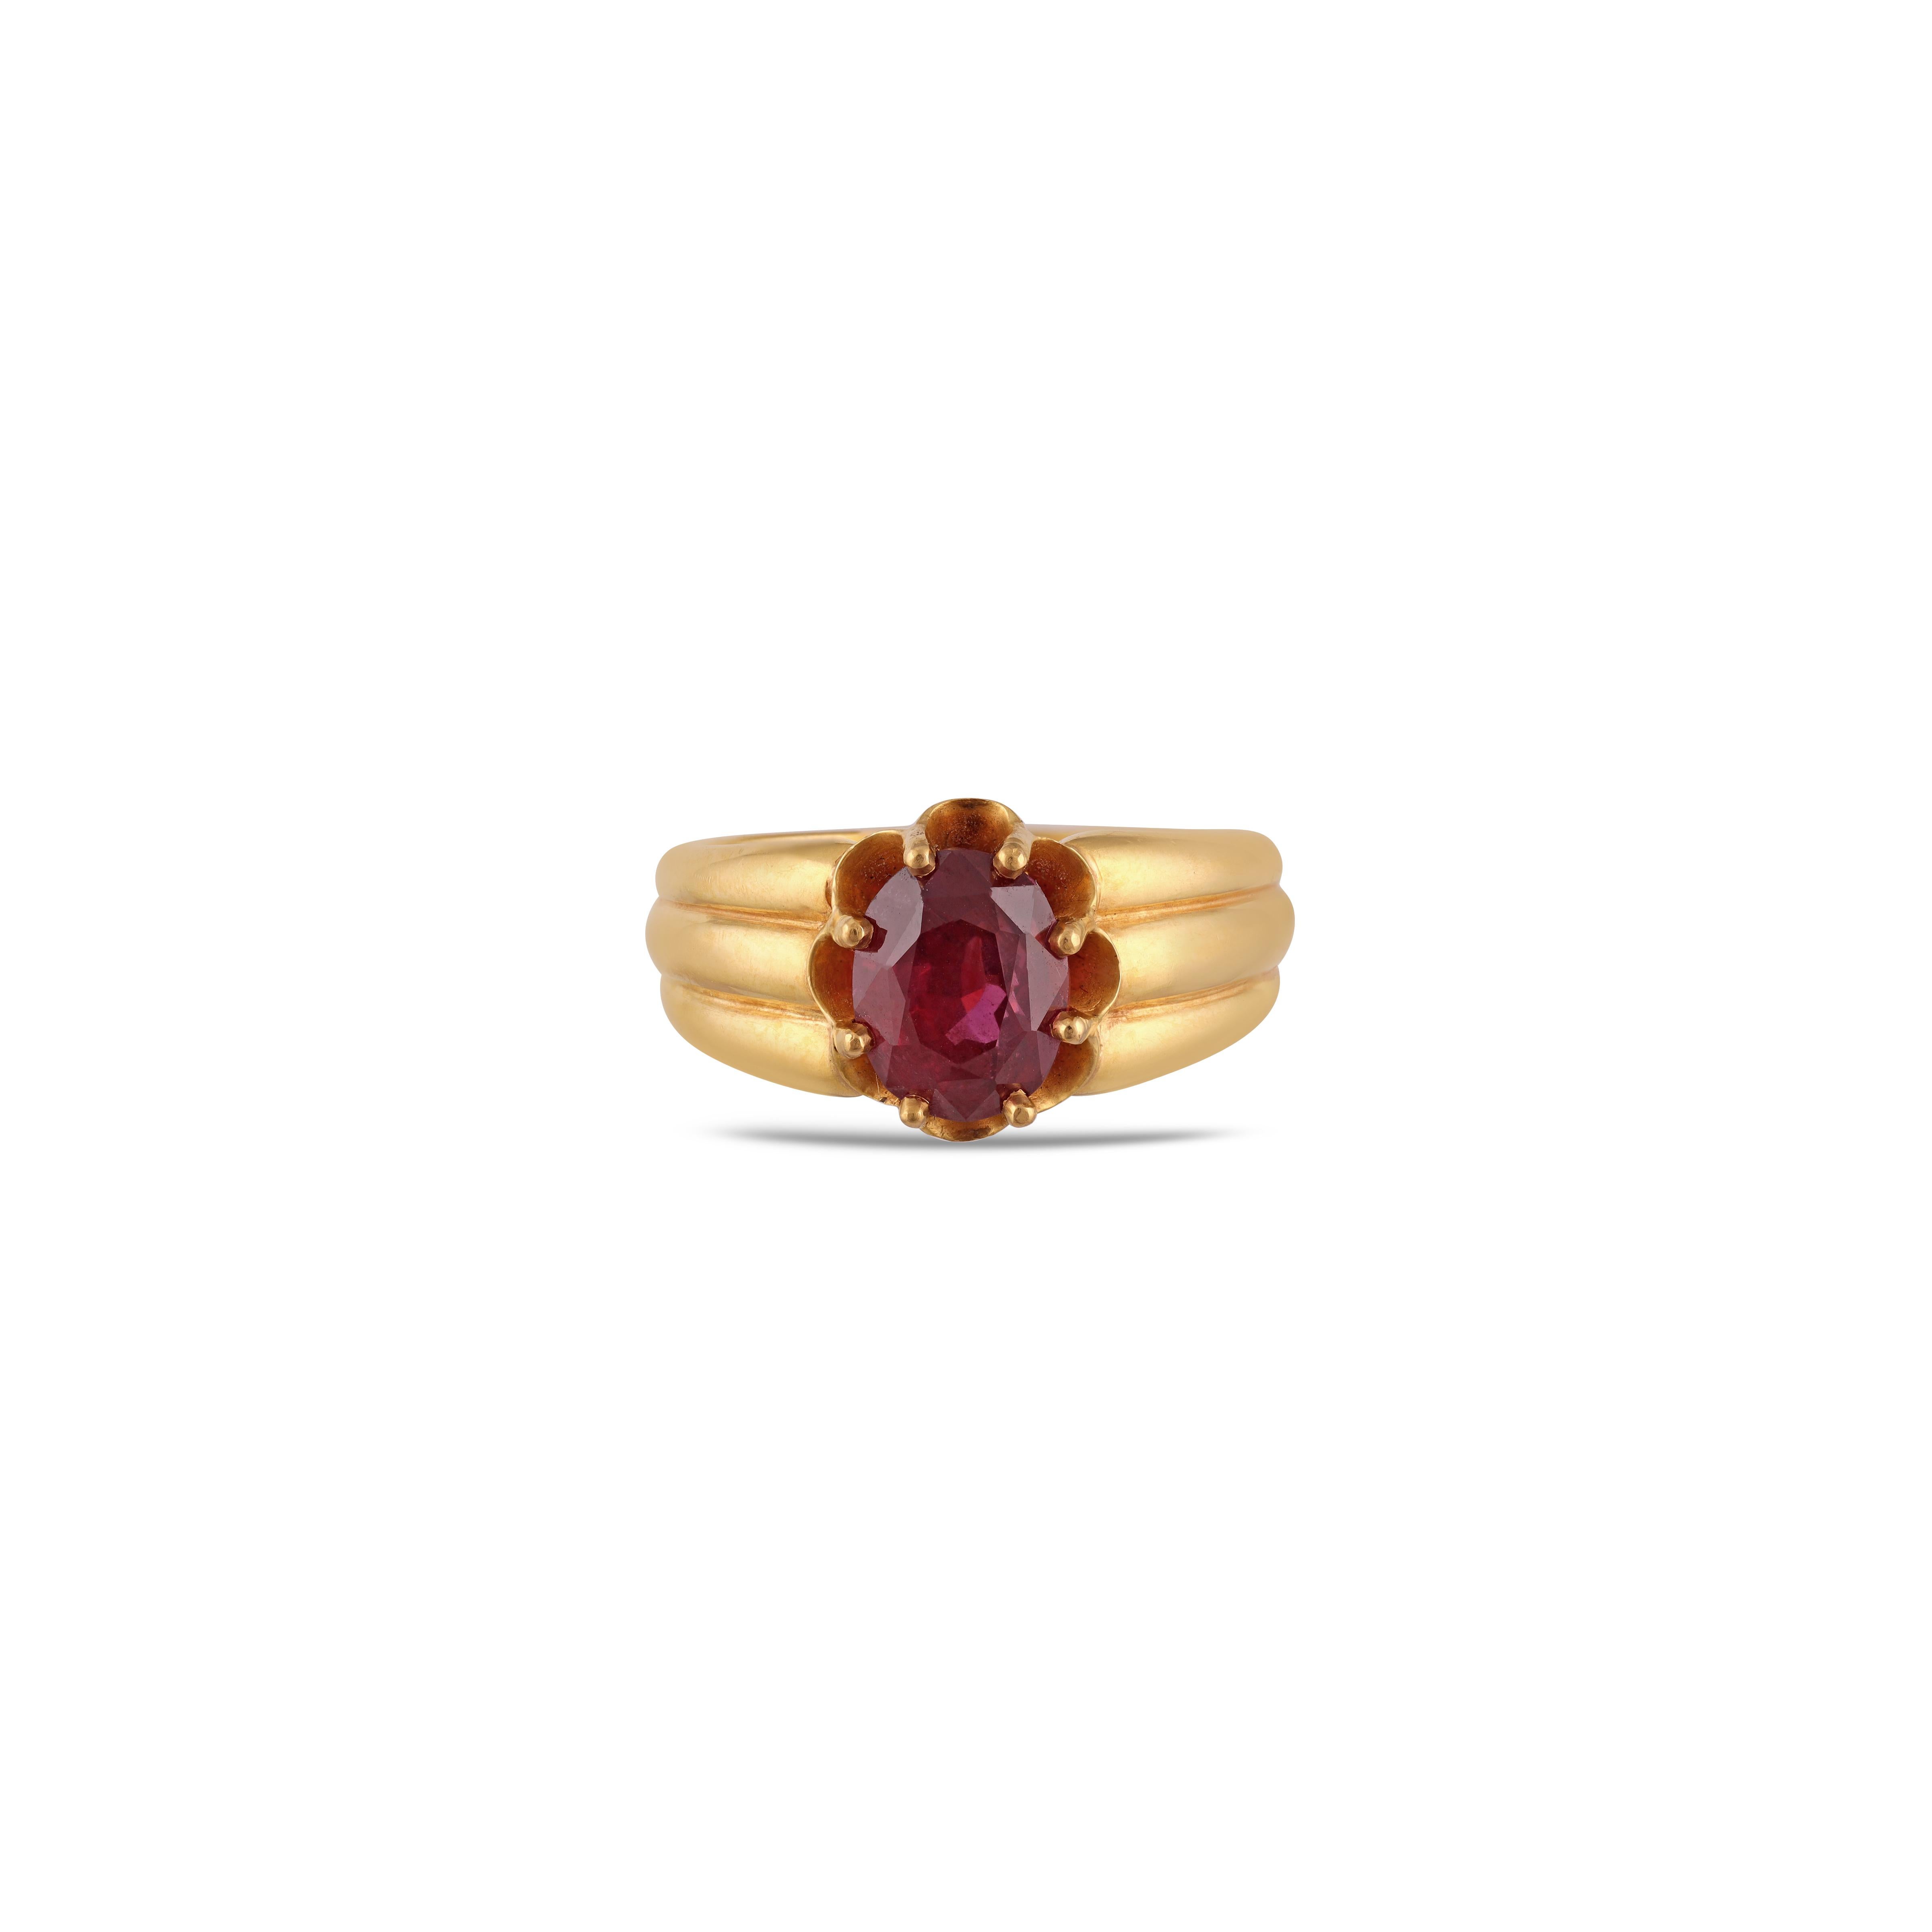 Royal Handcrafted  Natural Mozambique Ruby Ring in 22k Gold 

Natural Mozambique Ruby - 3.27 CTS
22 Karat Gold 
